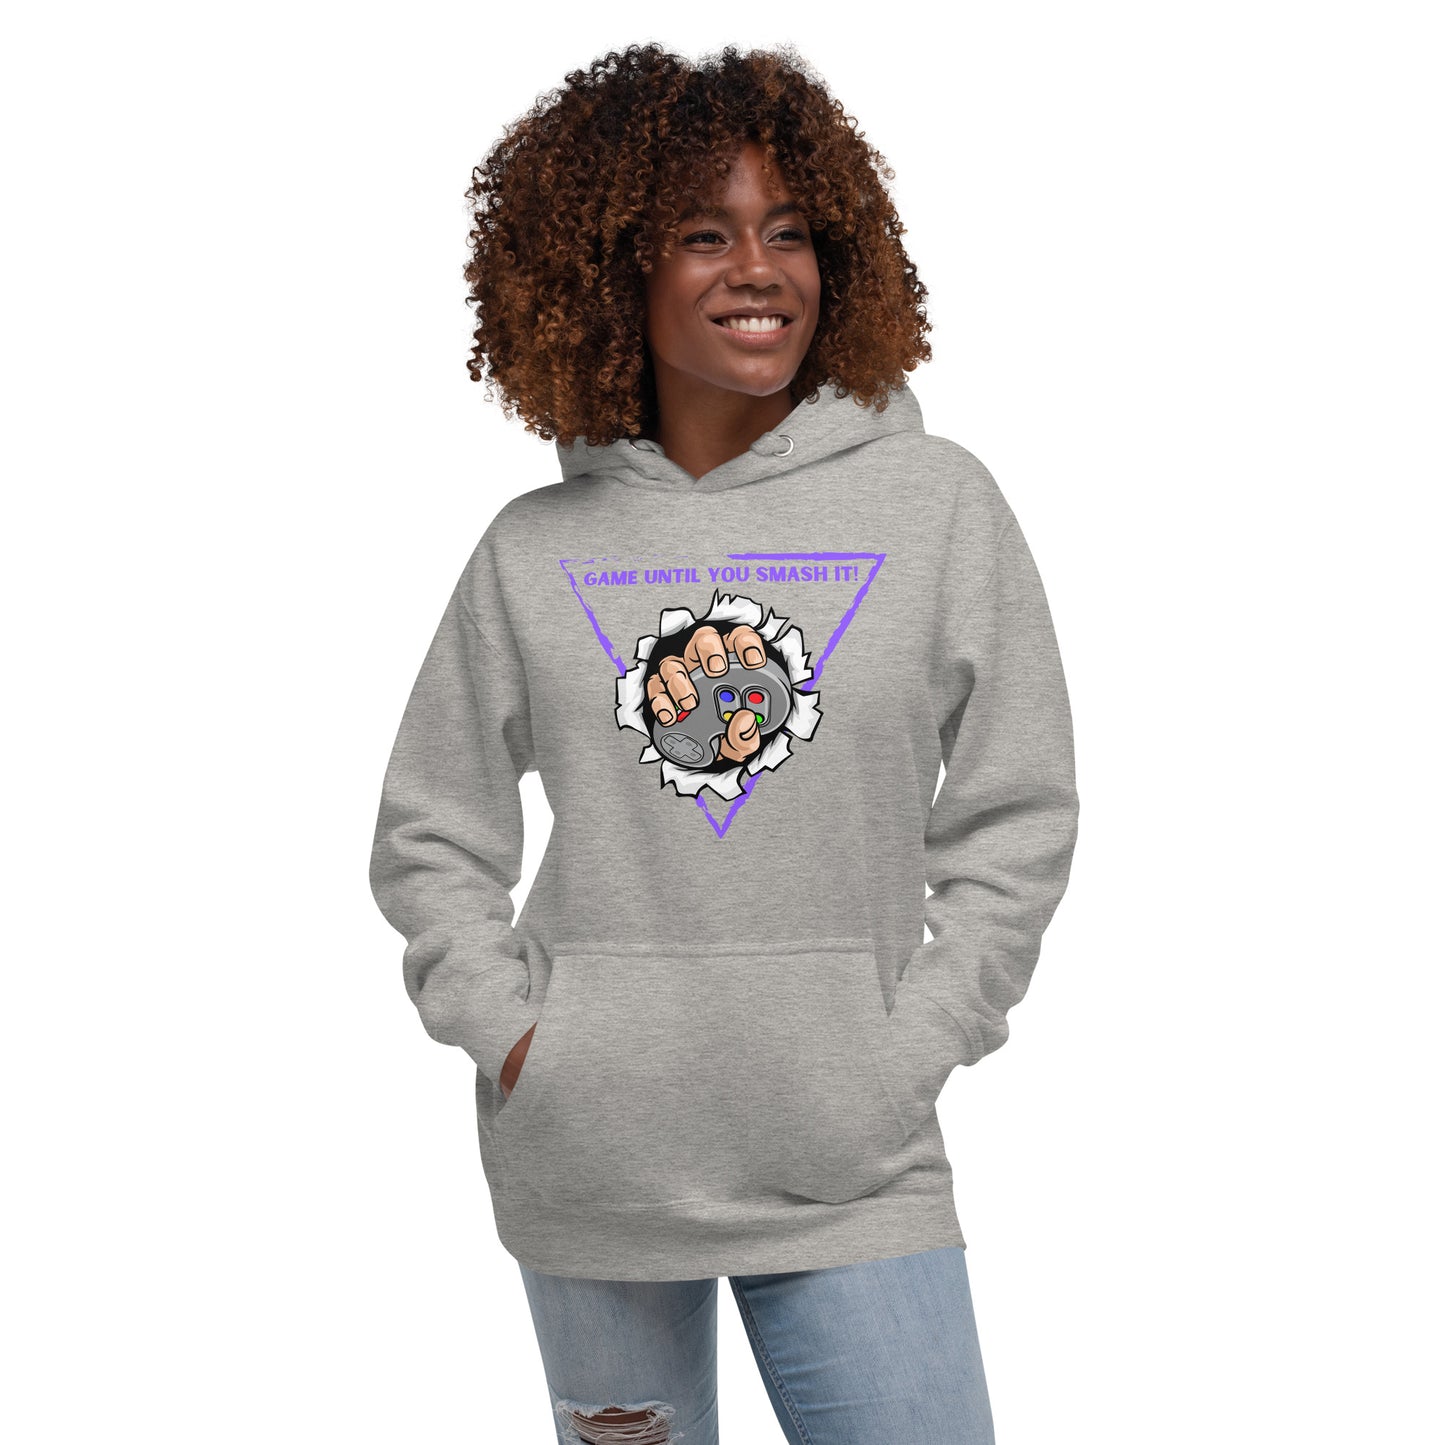 Woman in carbon grey hoodie with game until you smash it design